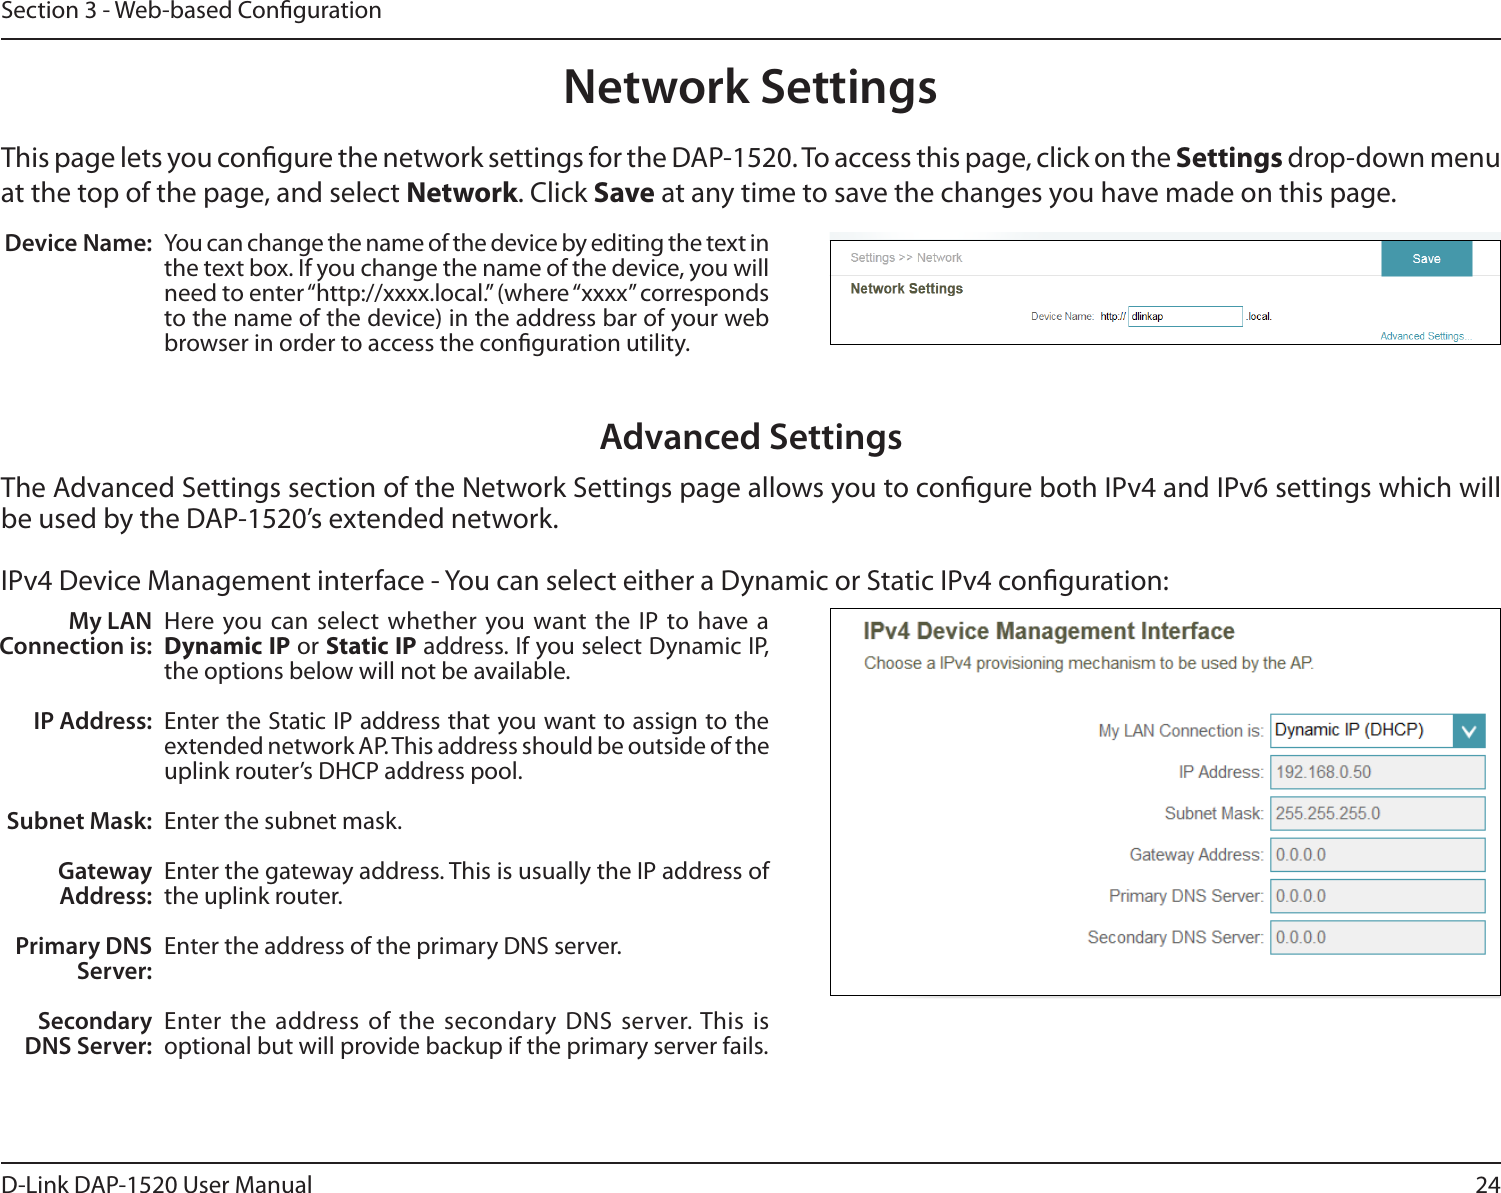 24D-Link DAP-1520 User ManualSection 3 - Web-based CongurationNetwork SettingsThis page lets you congure the network settings for the DAP-1520. To access this page, click on the Settings drop-down menu at the top of the page, and select Network. Click Save at any time to save the changes you have made on this page.Device Name: You can change the name of the device by editing the text in the text box. If you change the name of the device, you will need to enter “http://xxxx.local.” (where “xxxx” corresponds to the name of the device) in the address bar of your web browser in order to access the conguration utility. Advanced SettingsThe Advanced Settings section of the Network Settings page allows you to congure both IPv4 and IPv6 settings which will be used by the DAP-1520’s extended network. IPv4 Device Management interface - You can select either a Dynamic or Static IPv4 conguration:My LAN Connection is:IP Address:Subnet Mask:Gateway Address:Primary DNS Server:Secondary DNS Server:Here you can select whether you want the IP to have a Dynamic IP or Static IP address. If you select Dynamic IP, the options below will not be available. Enter the Static IP address that you want to assign to the extended network AP. This address should be outside of the uplink router’s DHCP address pool. Enter the subnet mask.Enter the gateway address. This is usually the IP address of the uplink router. Enter the address of the primary DNS server.Enter the address of the secondary DNS server. This is optional but will provide backup if the primary server fails. 